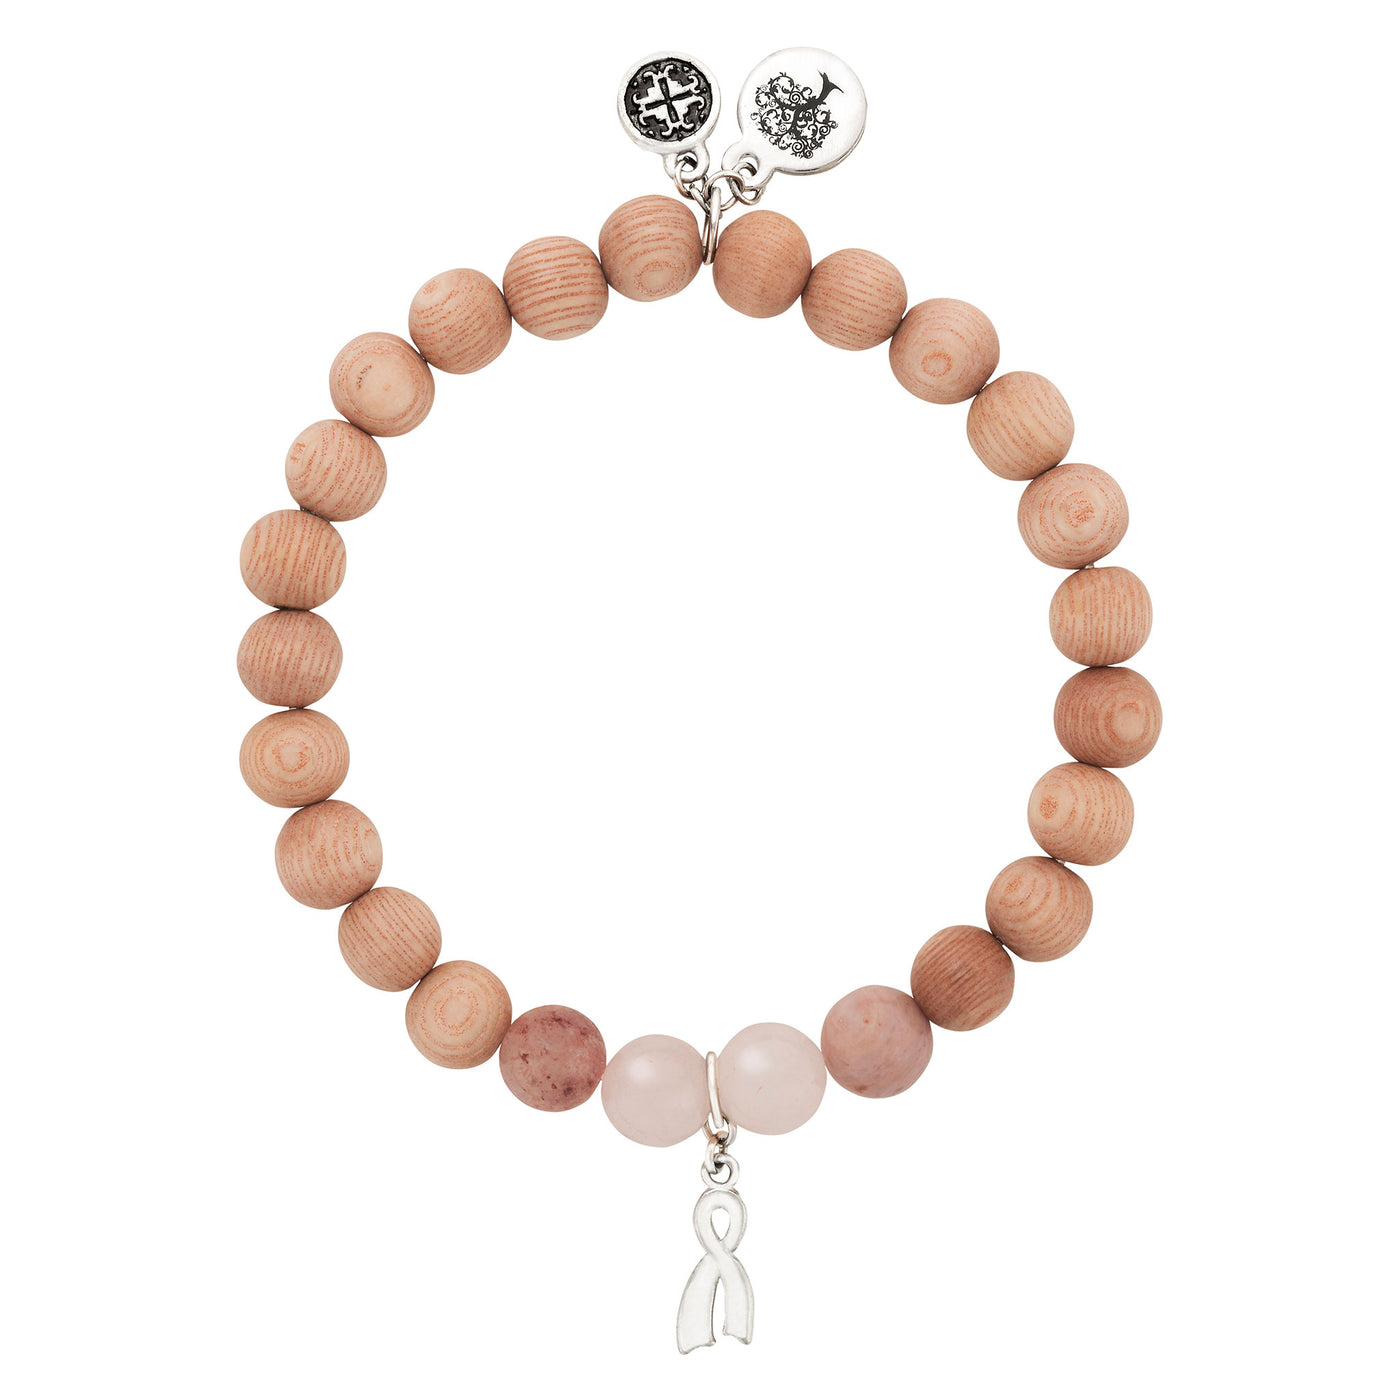 Wellness for Cancer Rosewood and Gemstone Stretch Bracelet with BCA charm